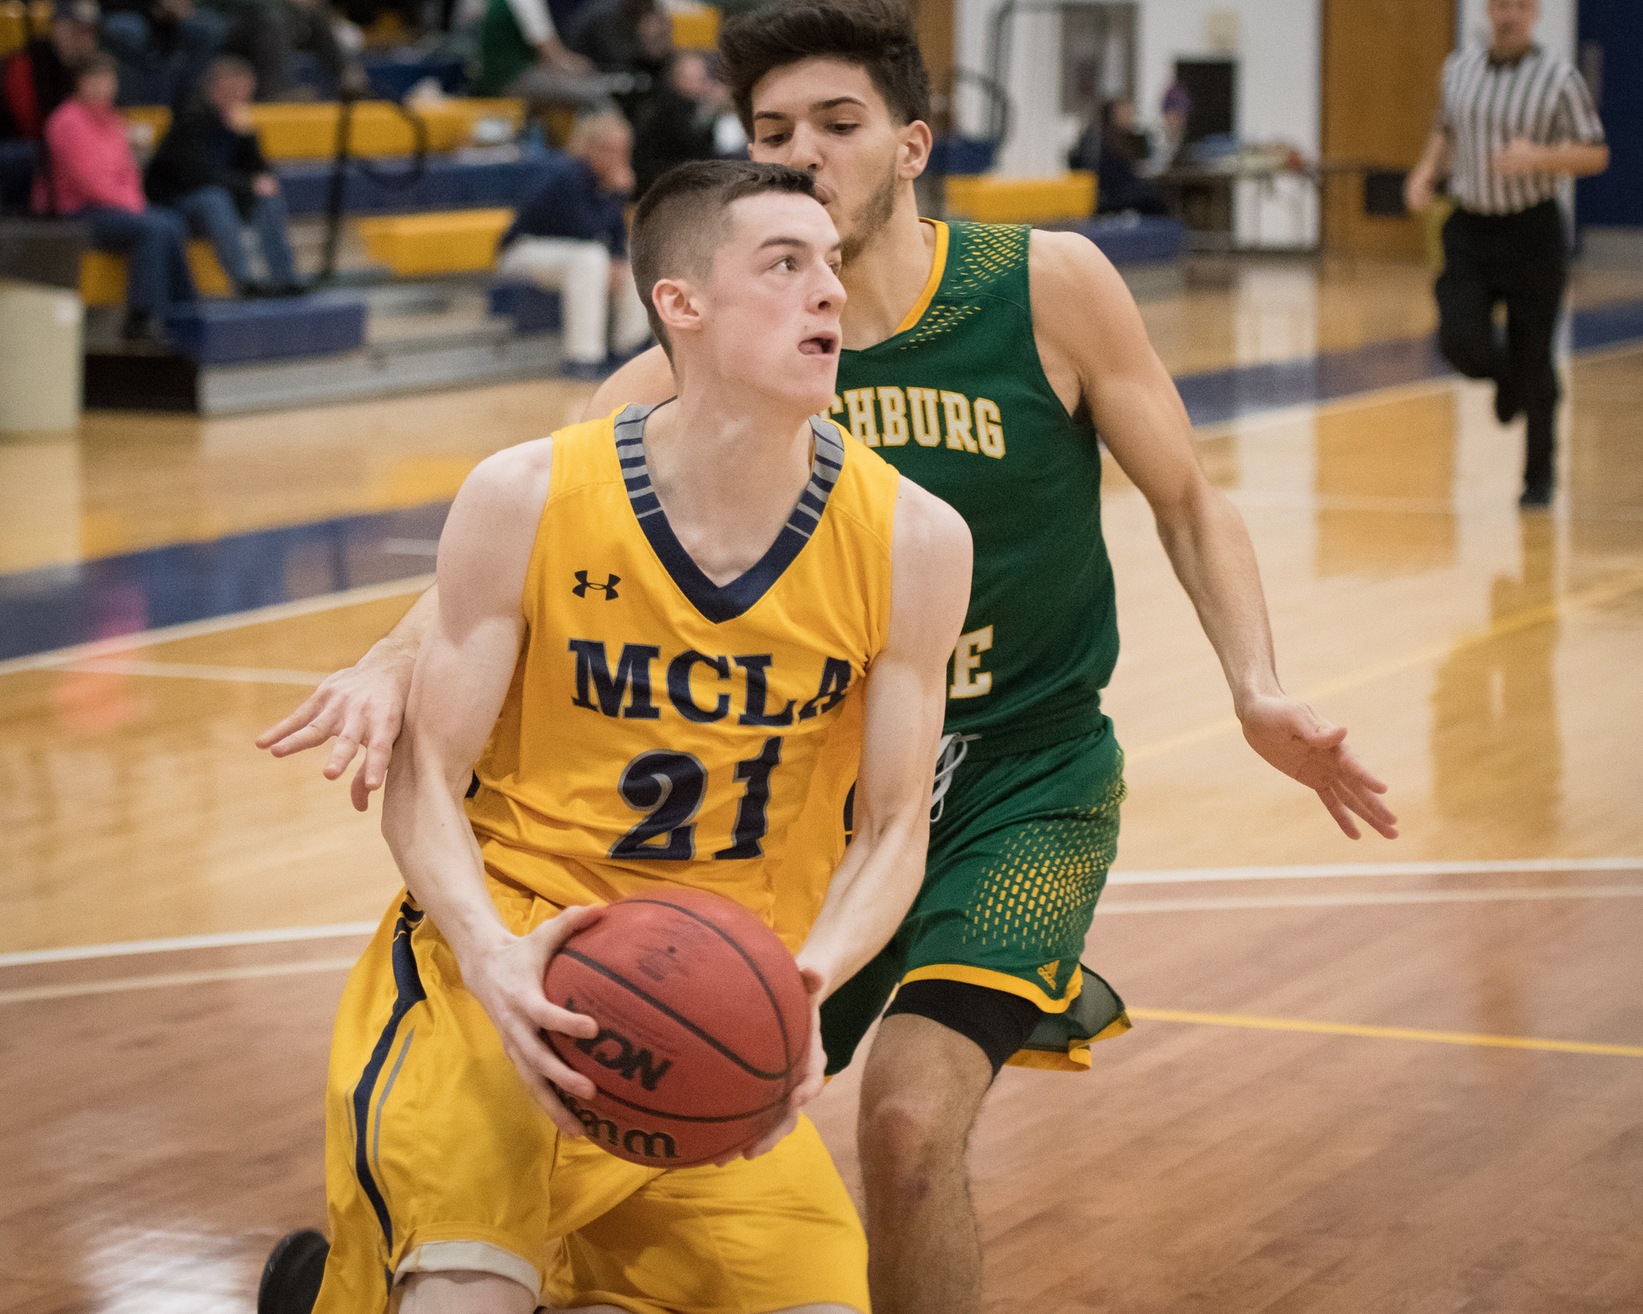 Yearsley leads Men's Basketball into MASCAC semi's with 63-52 win over Framingham State